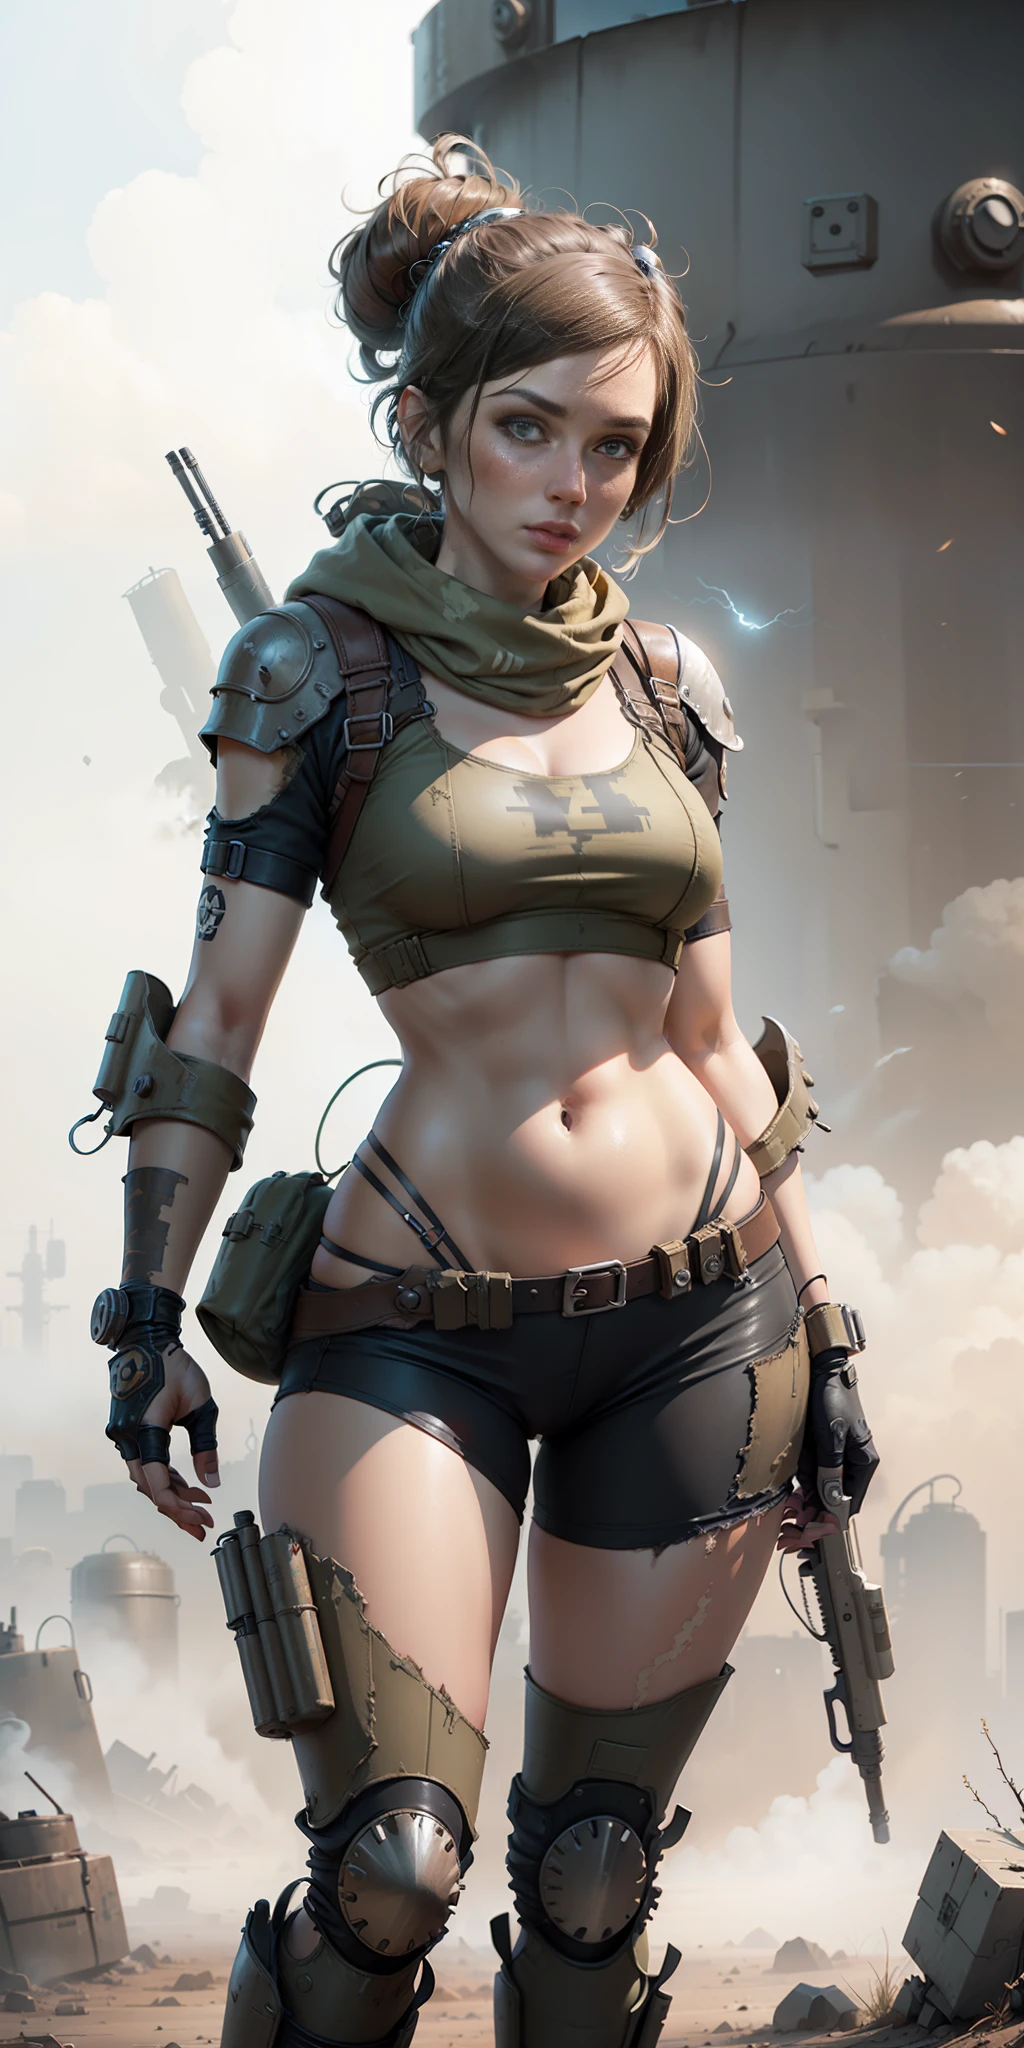 ((fallout 4)) drawing image of a woman standing on a hill with a rifle, standing, in an armored vault suit suit, female character concept art, Fallout Wasteland art, detailed, Fallout story, female character art, with a light leather armor, post-apocalyptic scavenger, ((white background)), post-apocalyptic explorer, female punk diesel,  Hyper-detailed full-body shot, post-apocalyptic costume, dieselpunk